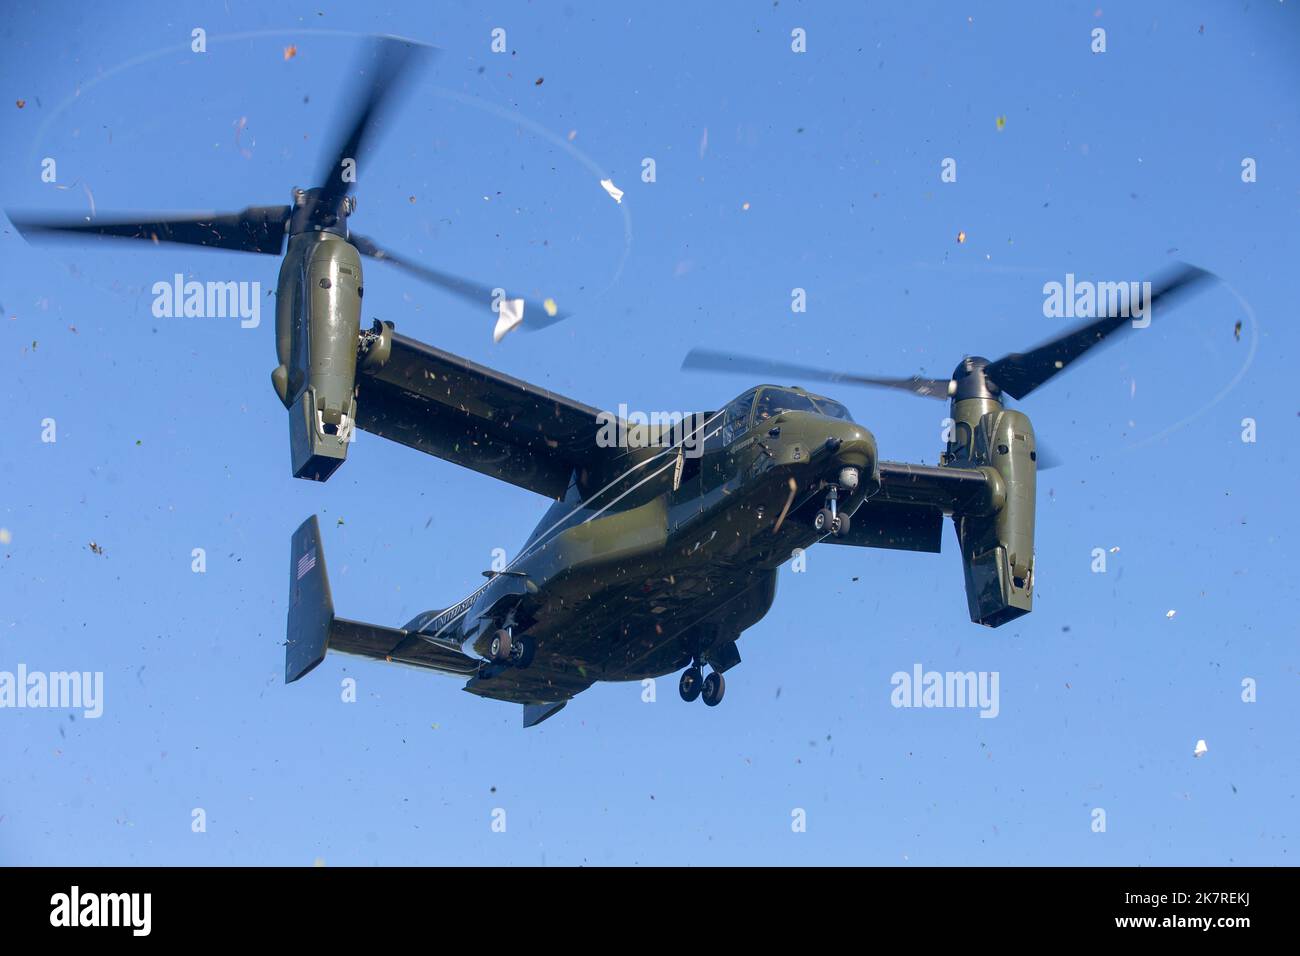 A VM-22 Osprey flies overhead for a leaflet drop during the Information Warfighter Exercise (IWX) at Camp Upshur, VA, Sept. 16, 2022. The IWX is a training event that focuses on implementing all Information Related Capability requirements with the joint force, government agencies and partnering nations that provides accurate subject matter expertise to all Marine Corps operations. (Official U.S. Marine Corps photo taken by Cpl. Eric Hunyh) Stock Photo